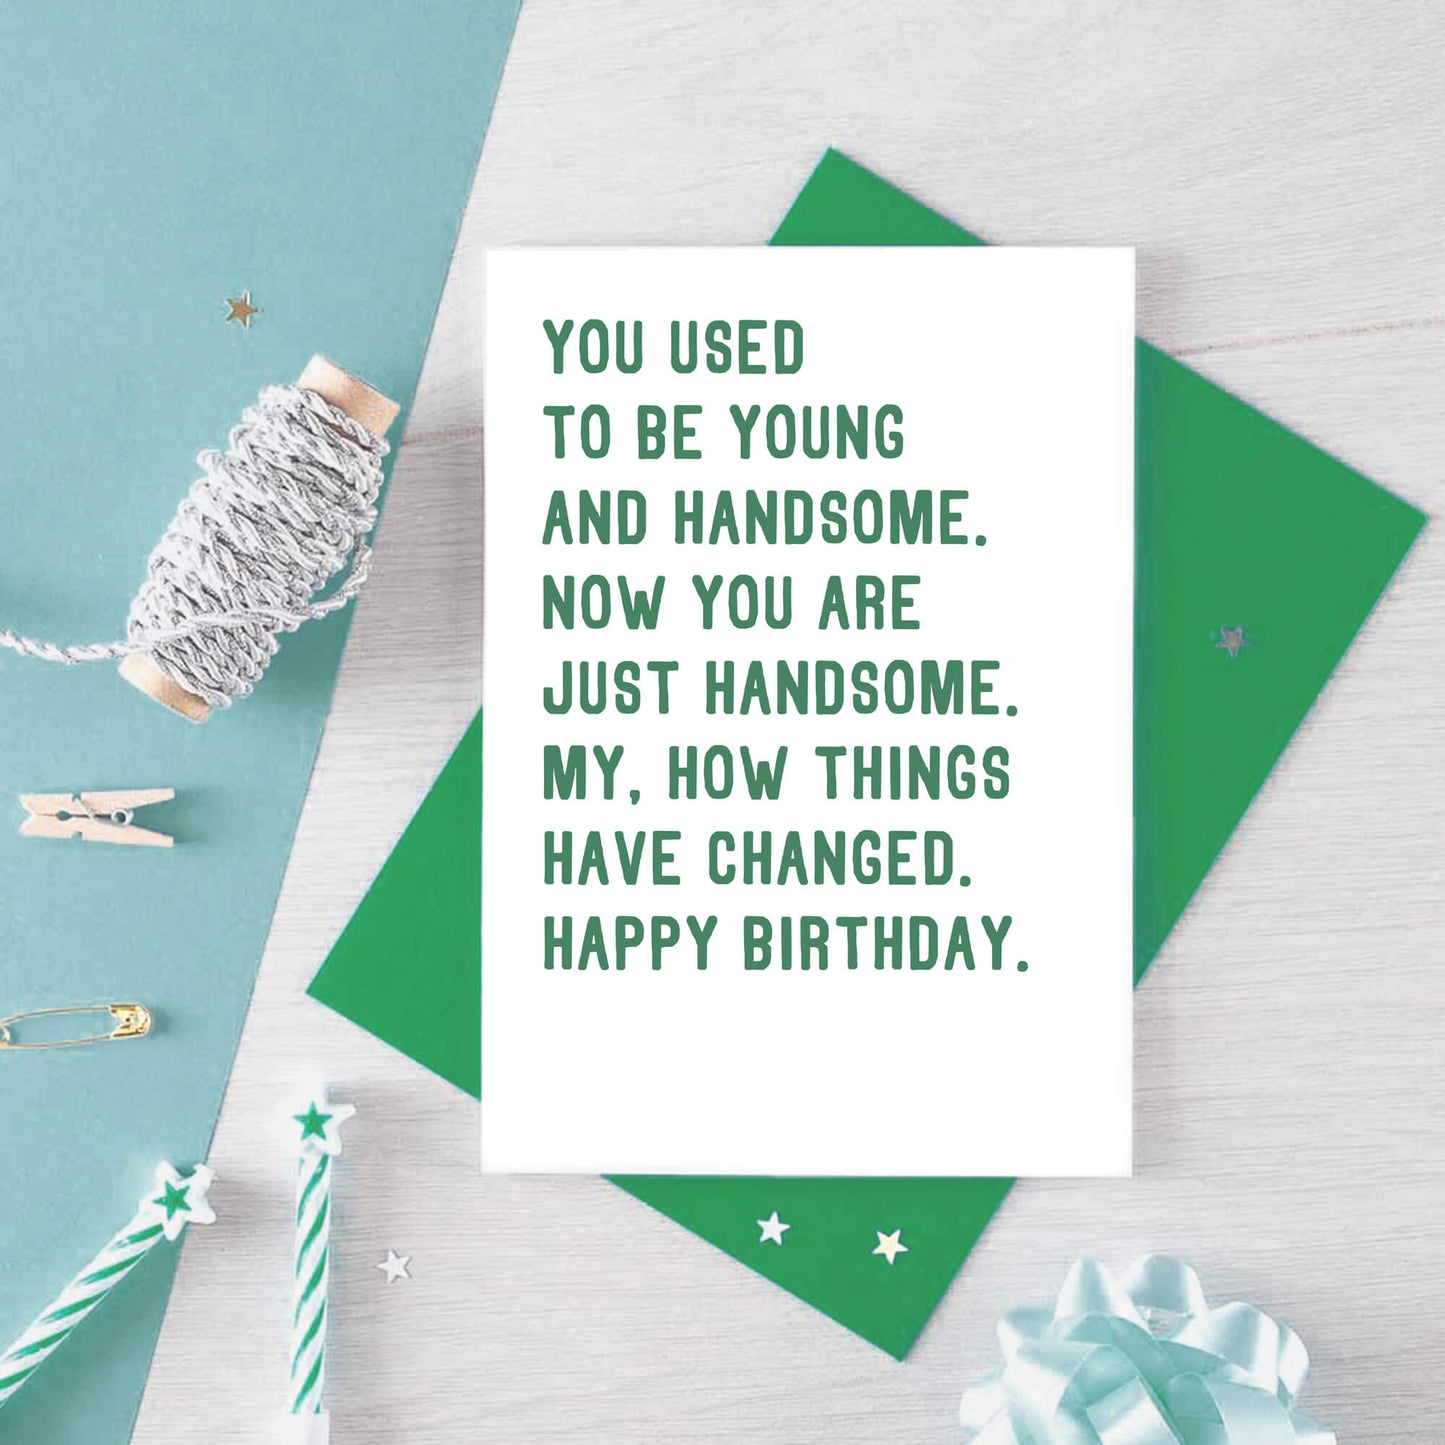 Birthday Card by SixElevenCreations. Reads You used to be young and handsome. Now you are just handsome. My, how things have changed. Happy birthday. Product Code SE2048A6